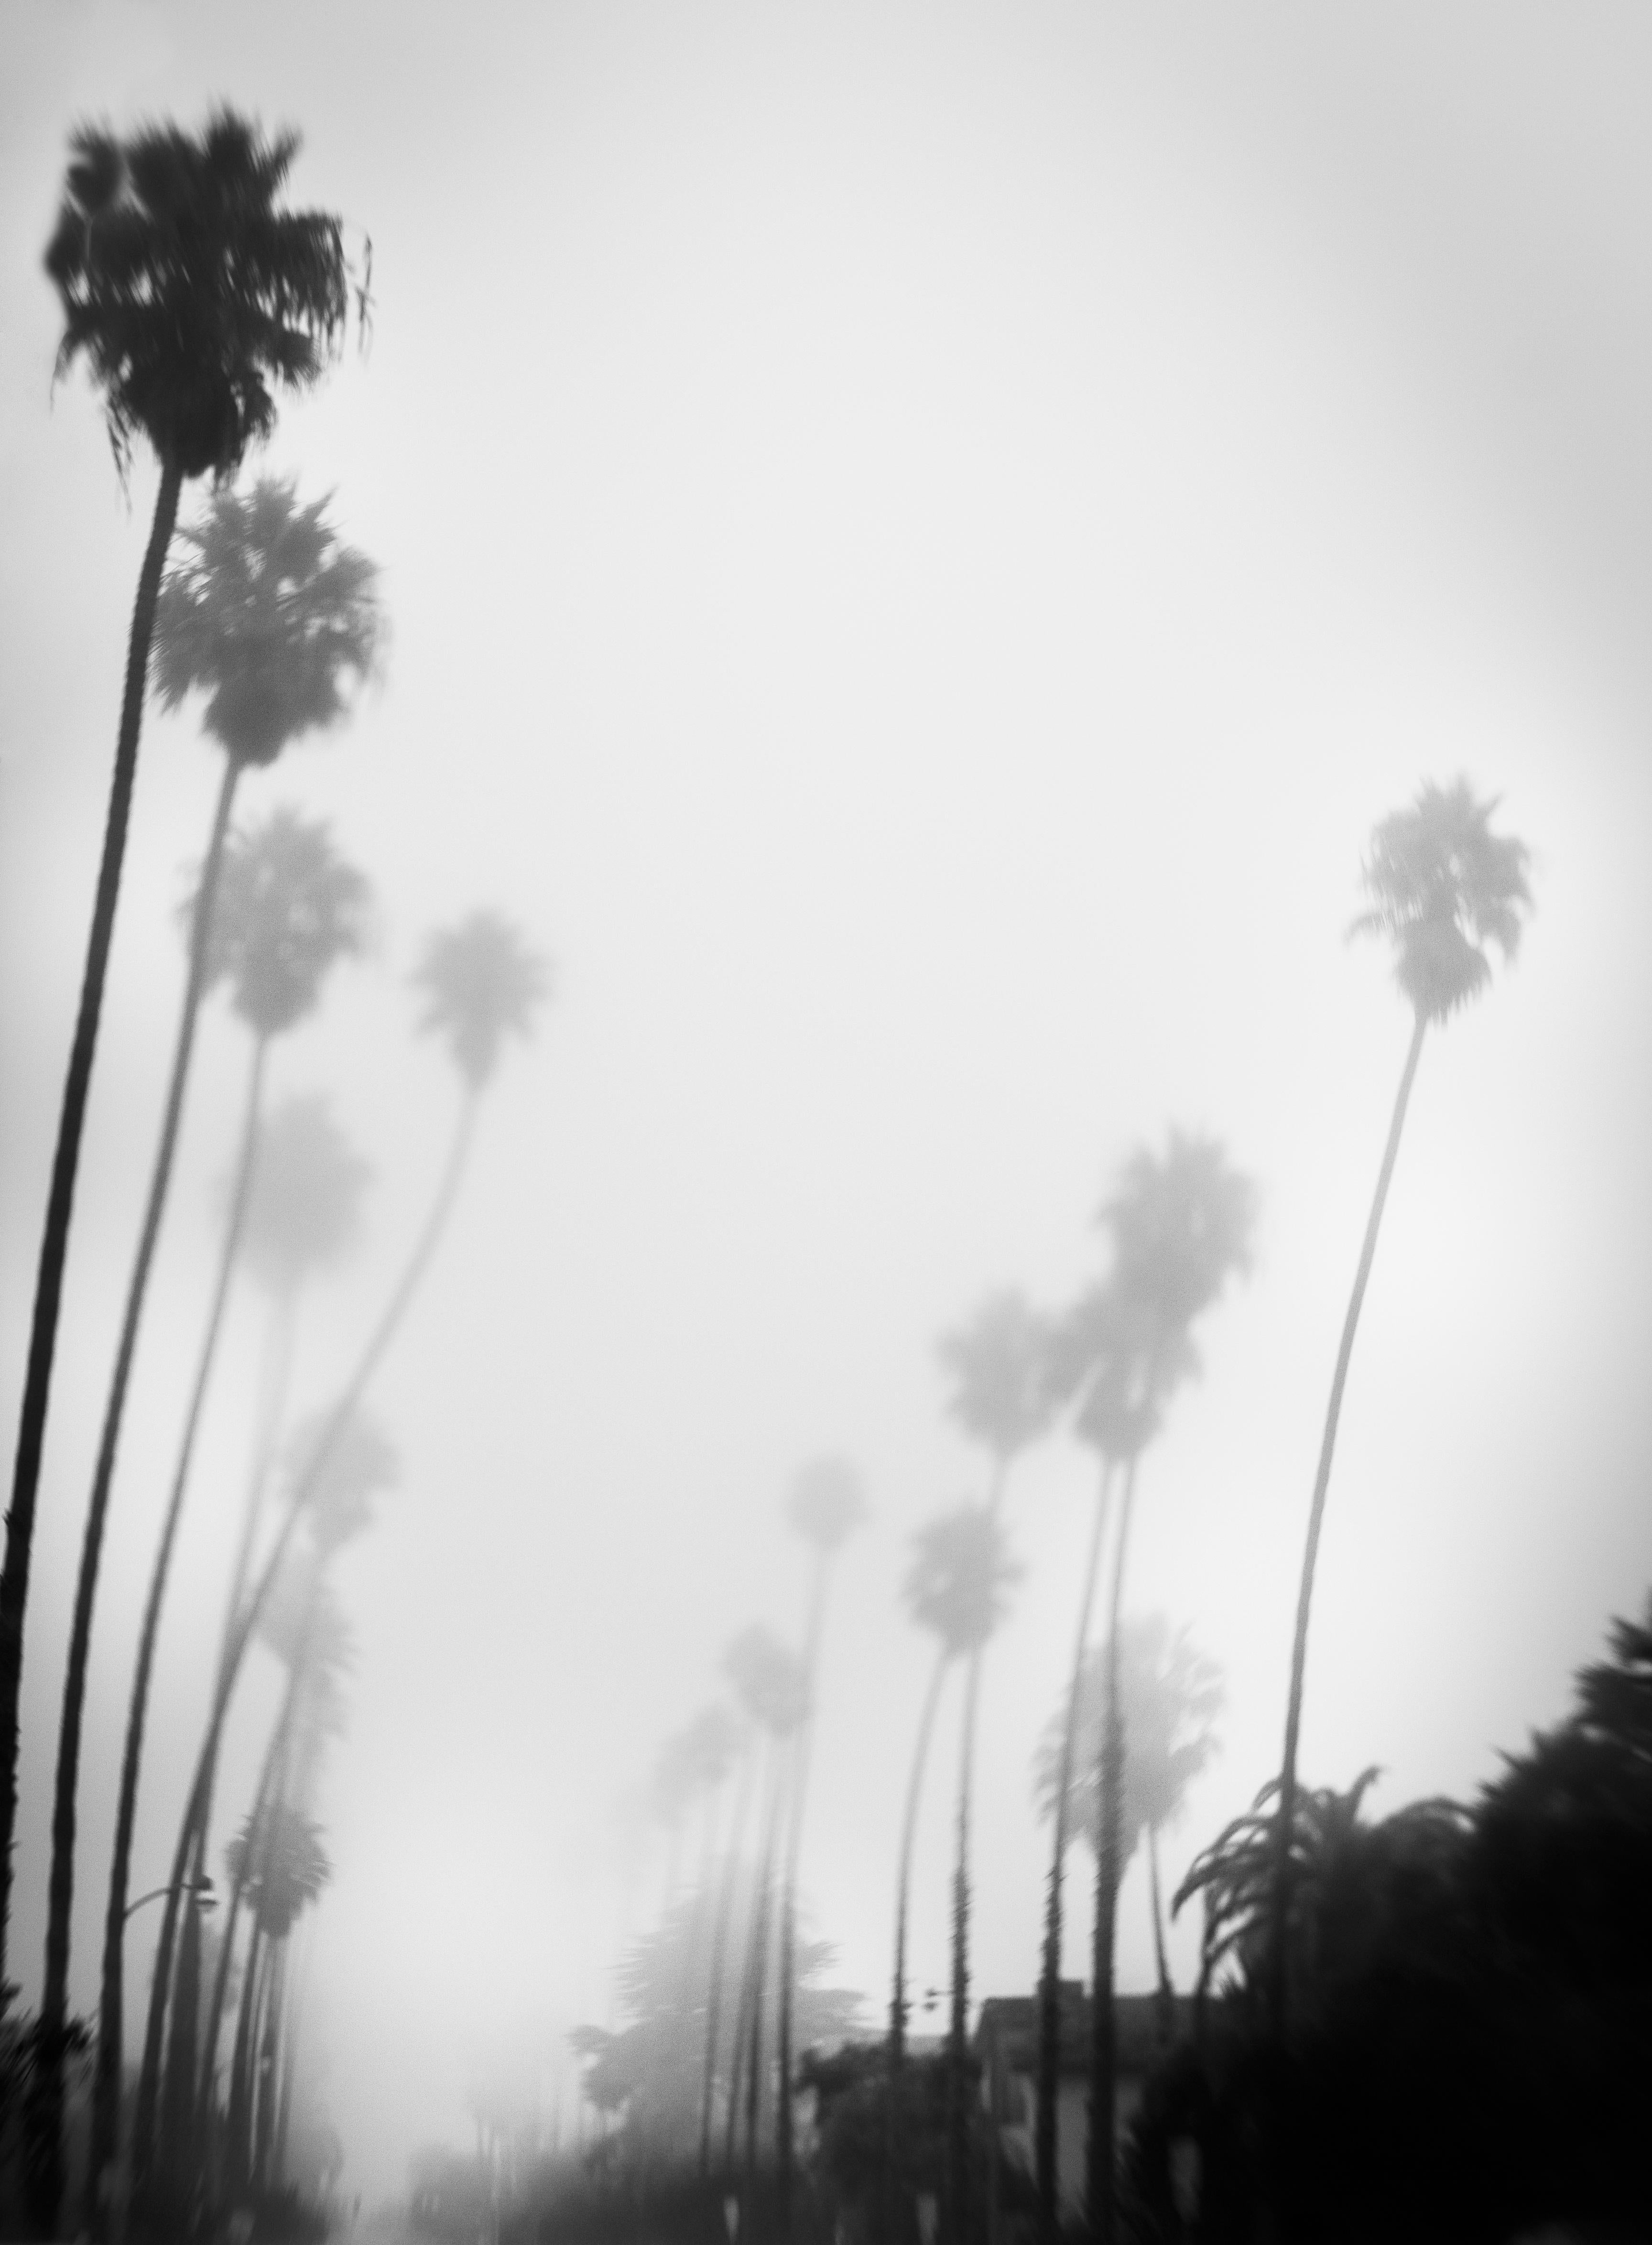 Palm Trees in Mist, Los Angeles